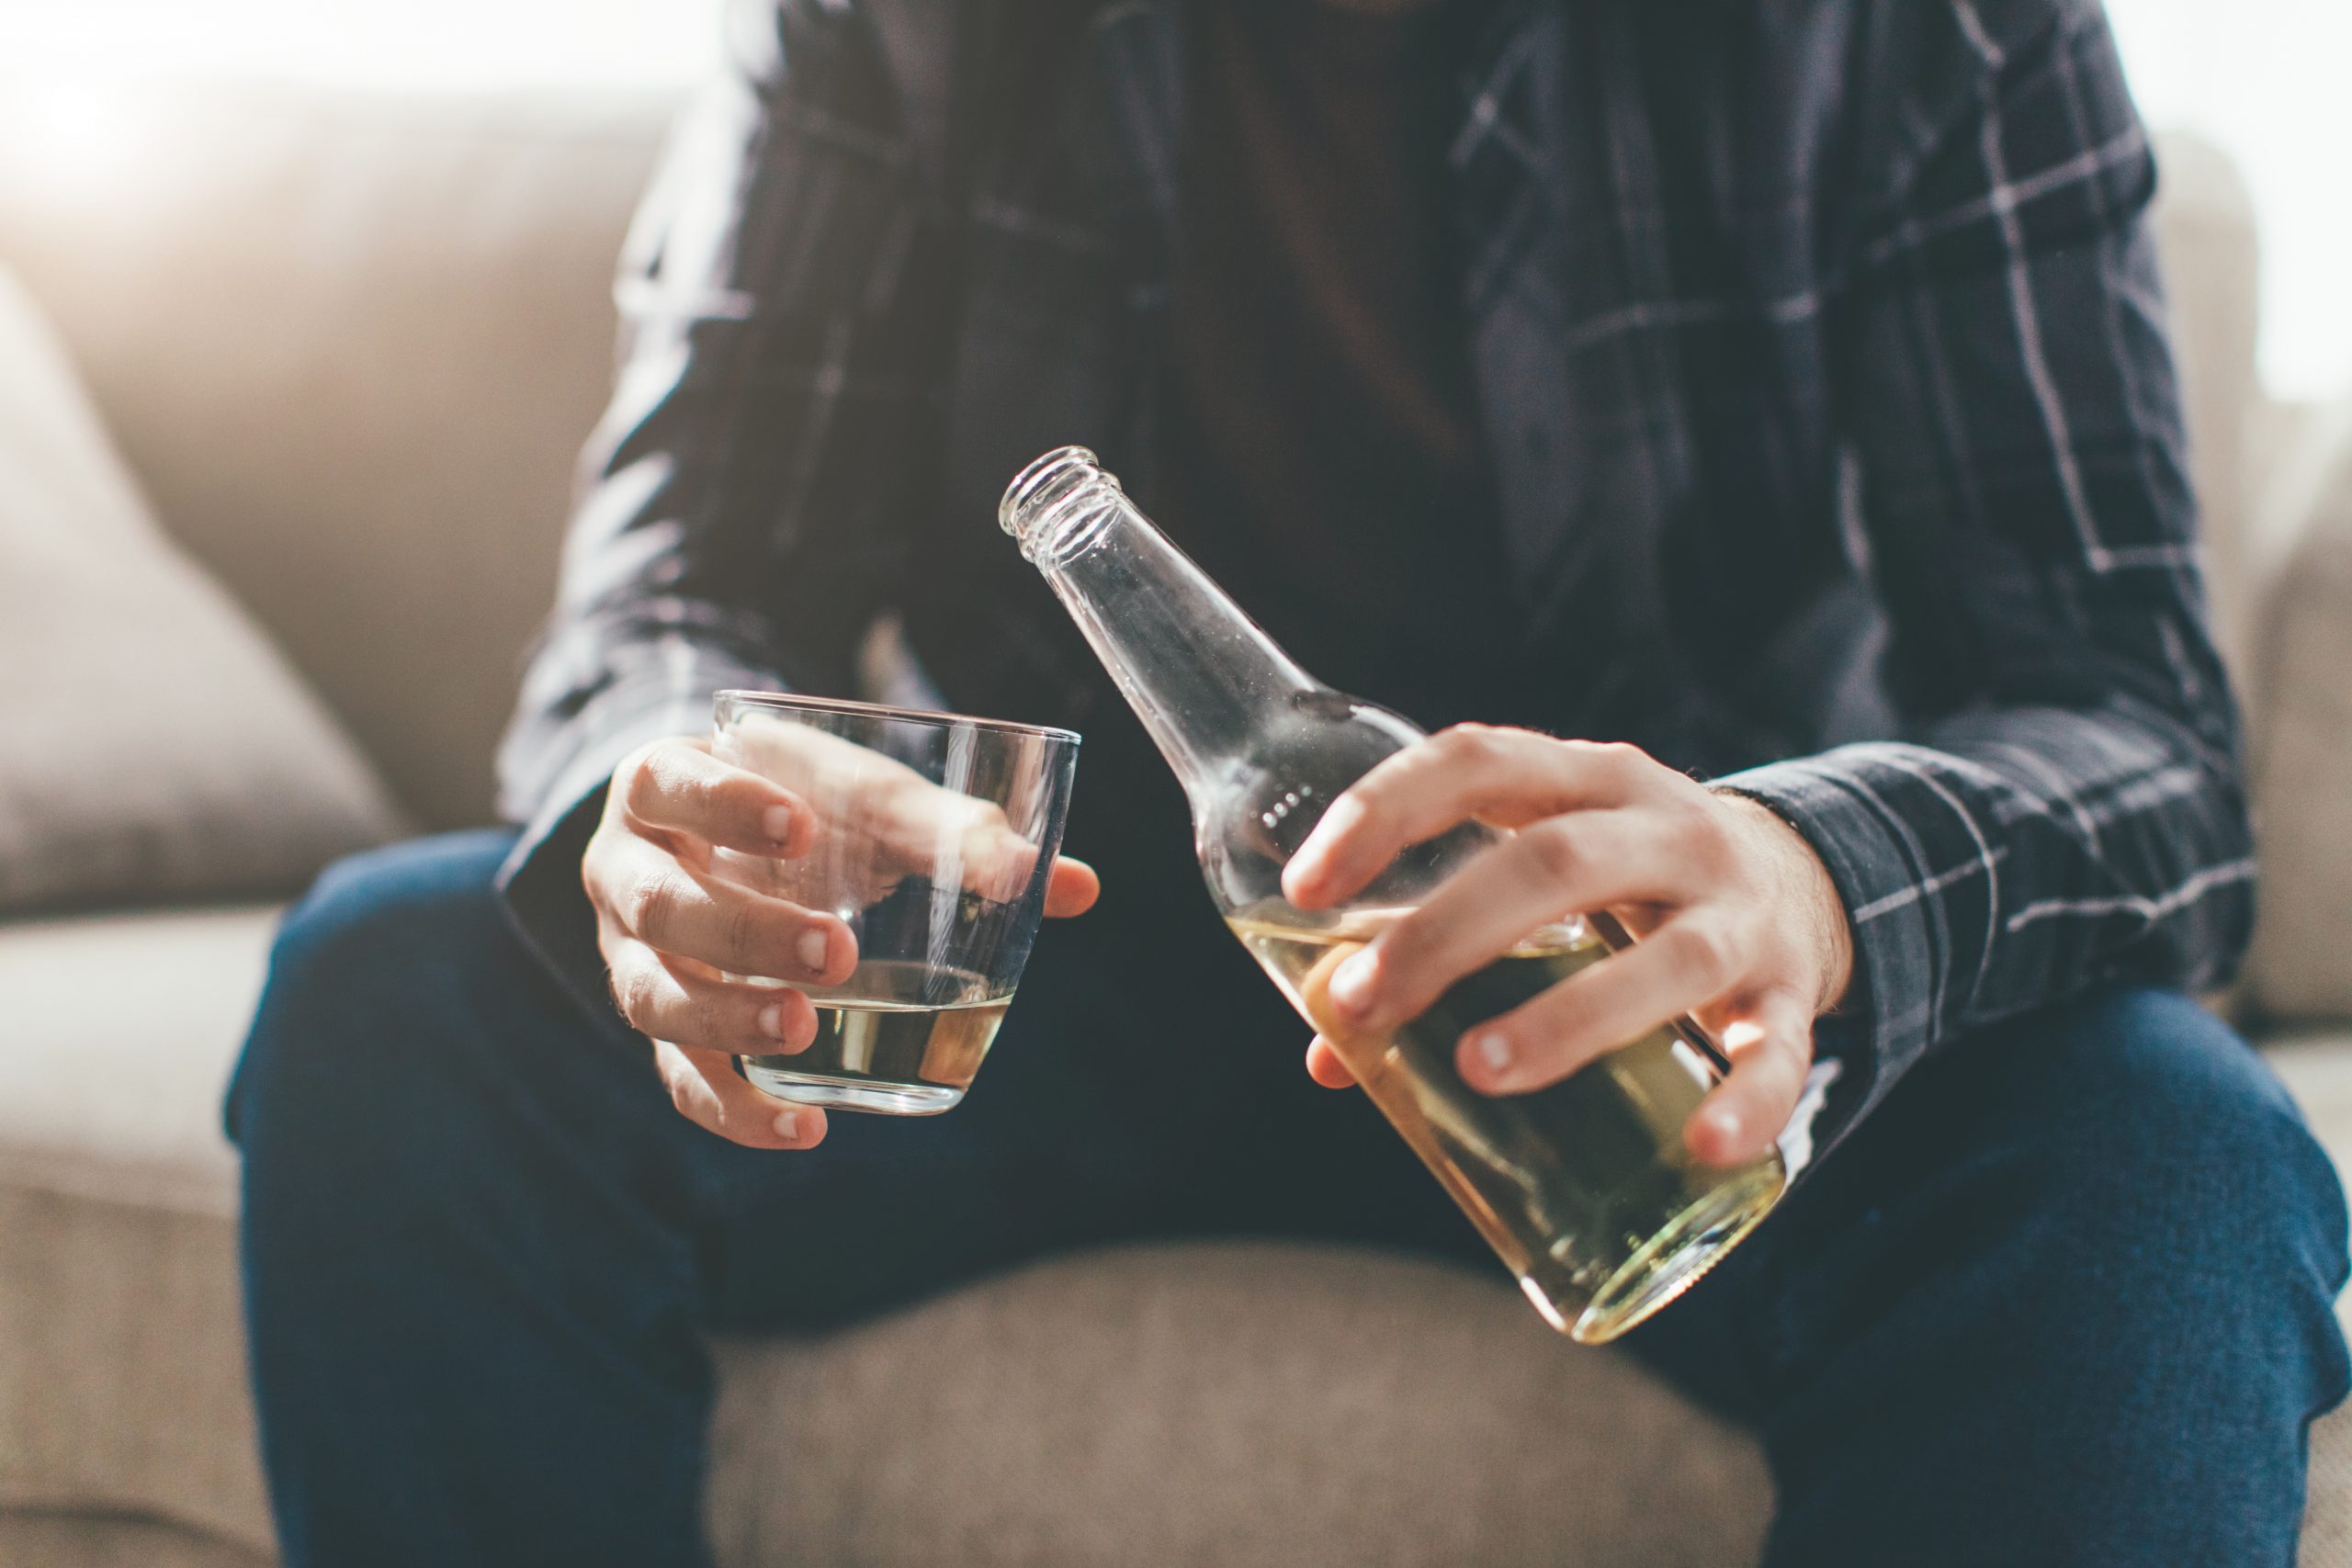 ketamine can stop alcoholics from heavy drinking